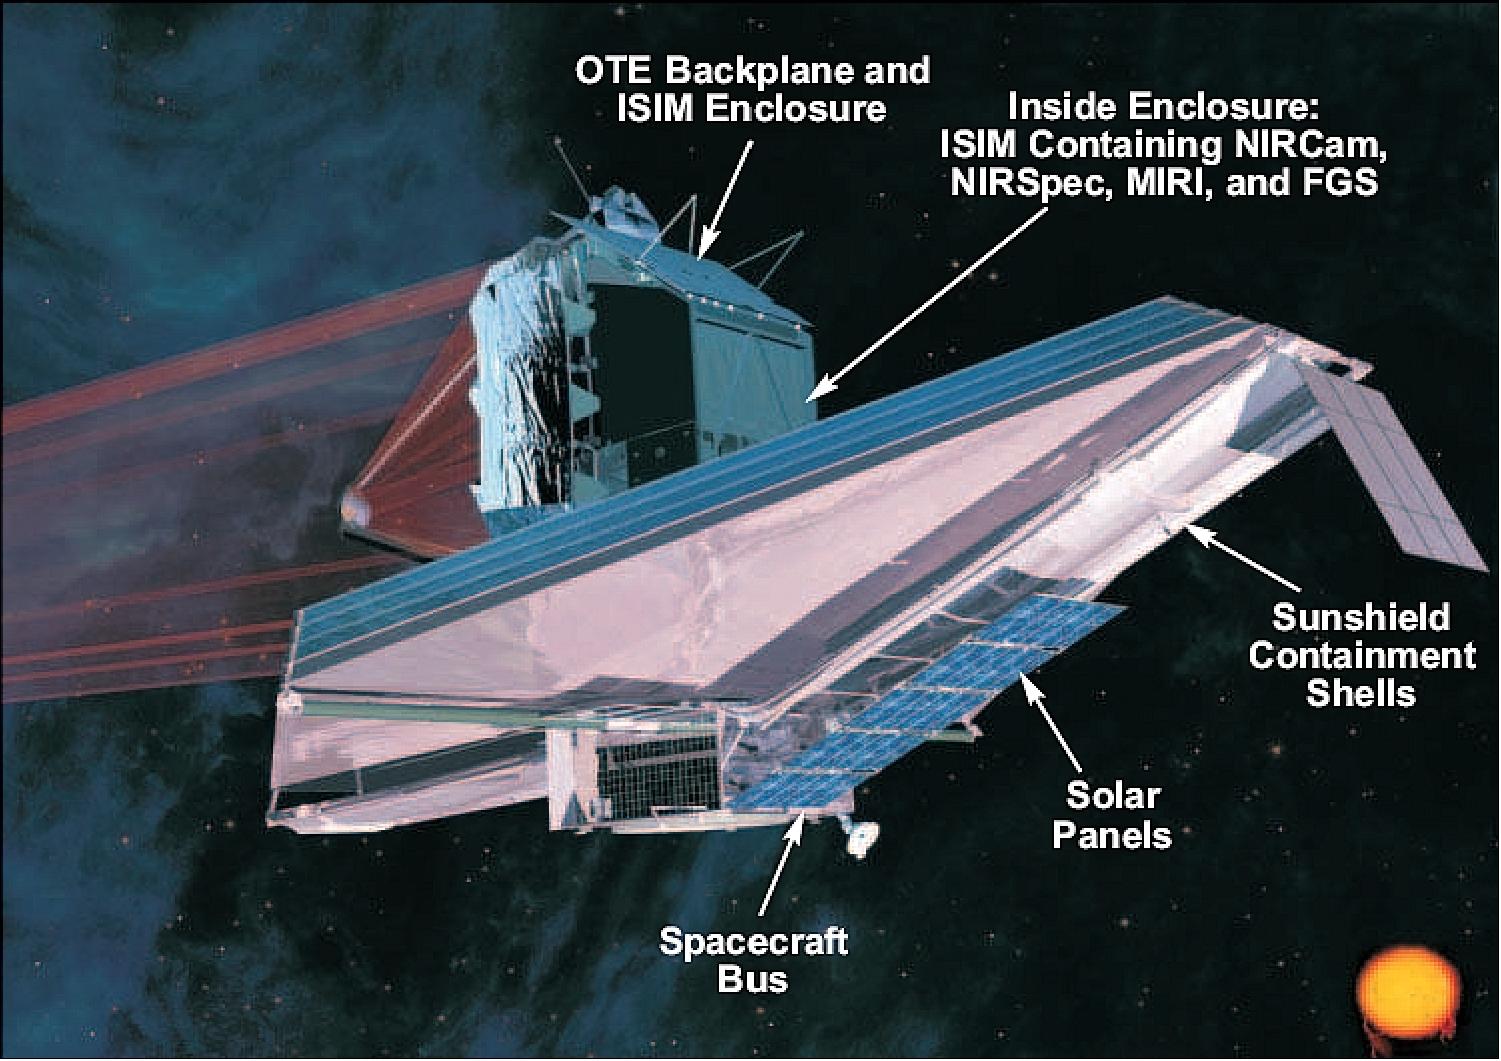 Figure 108: Deployed observatory, back view: Spacecraft bus, solar arrays, communications antenna, and ISIM (image credit: NGAS)